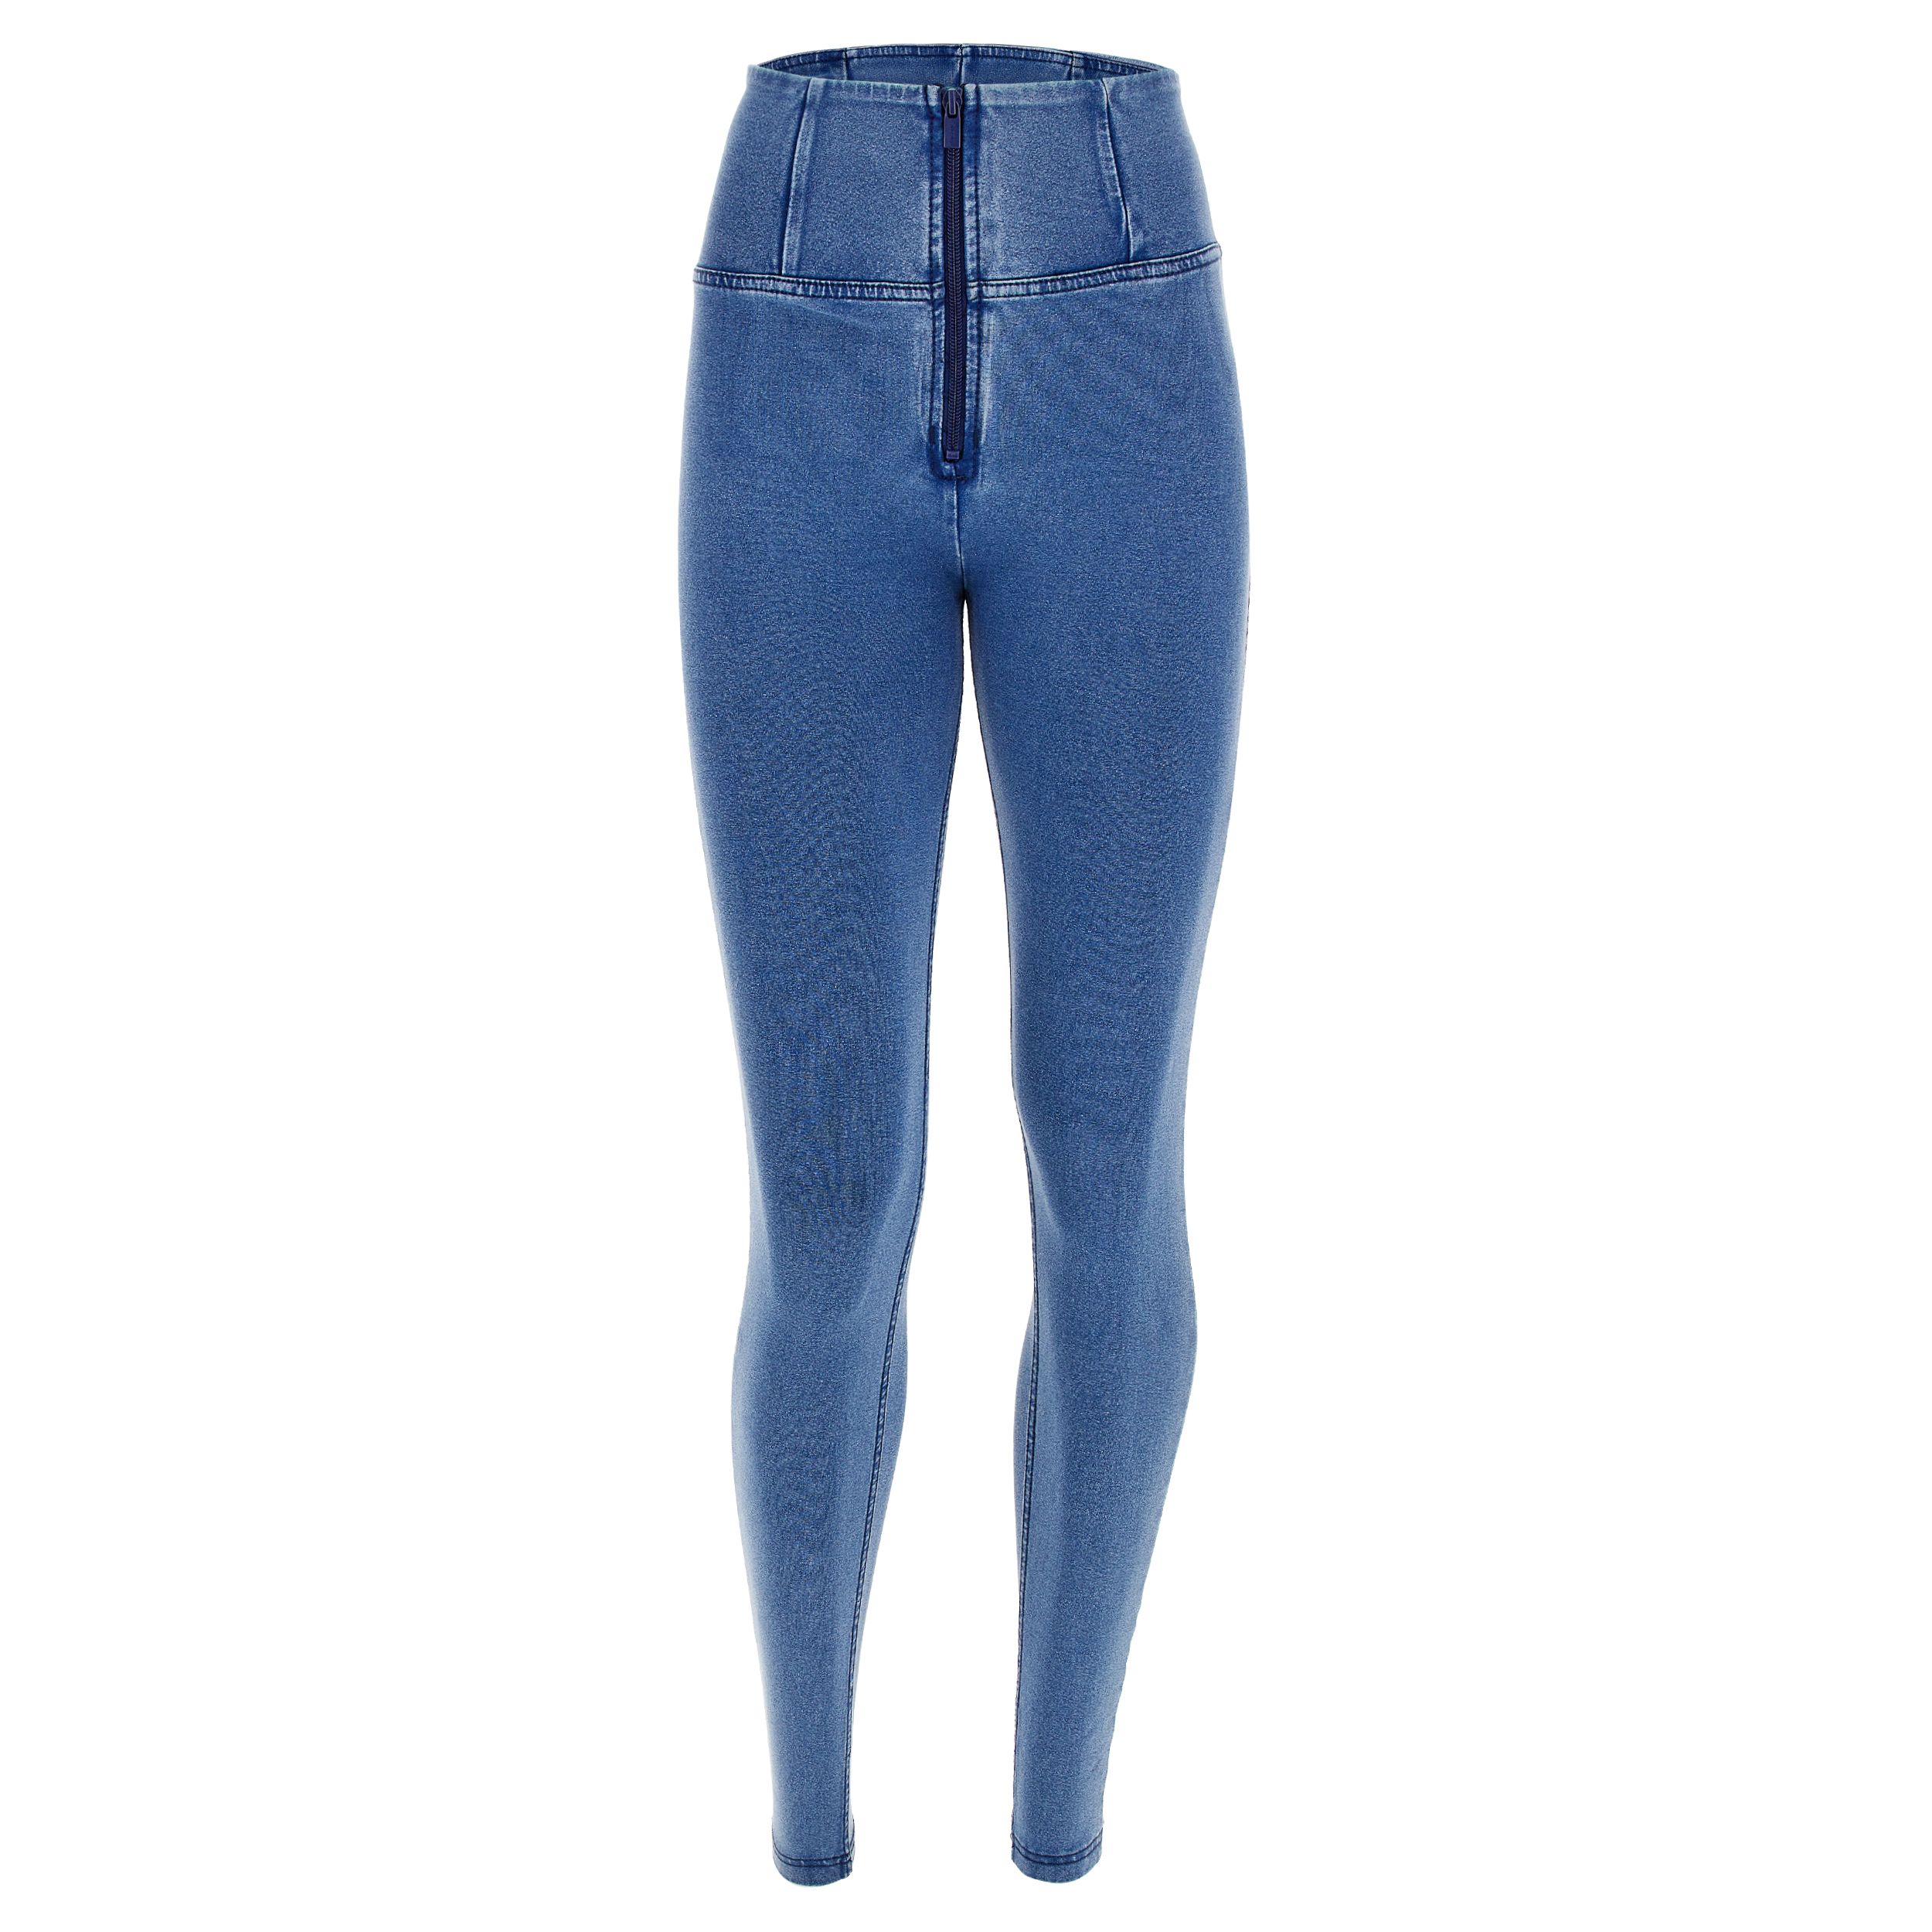 High waist WR.UP® shaping super skinny jeggings with a zip